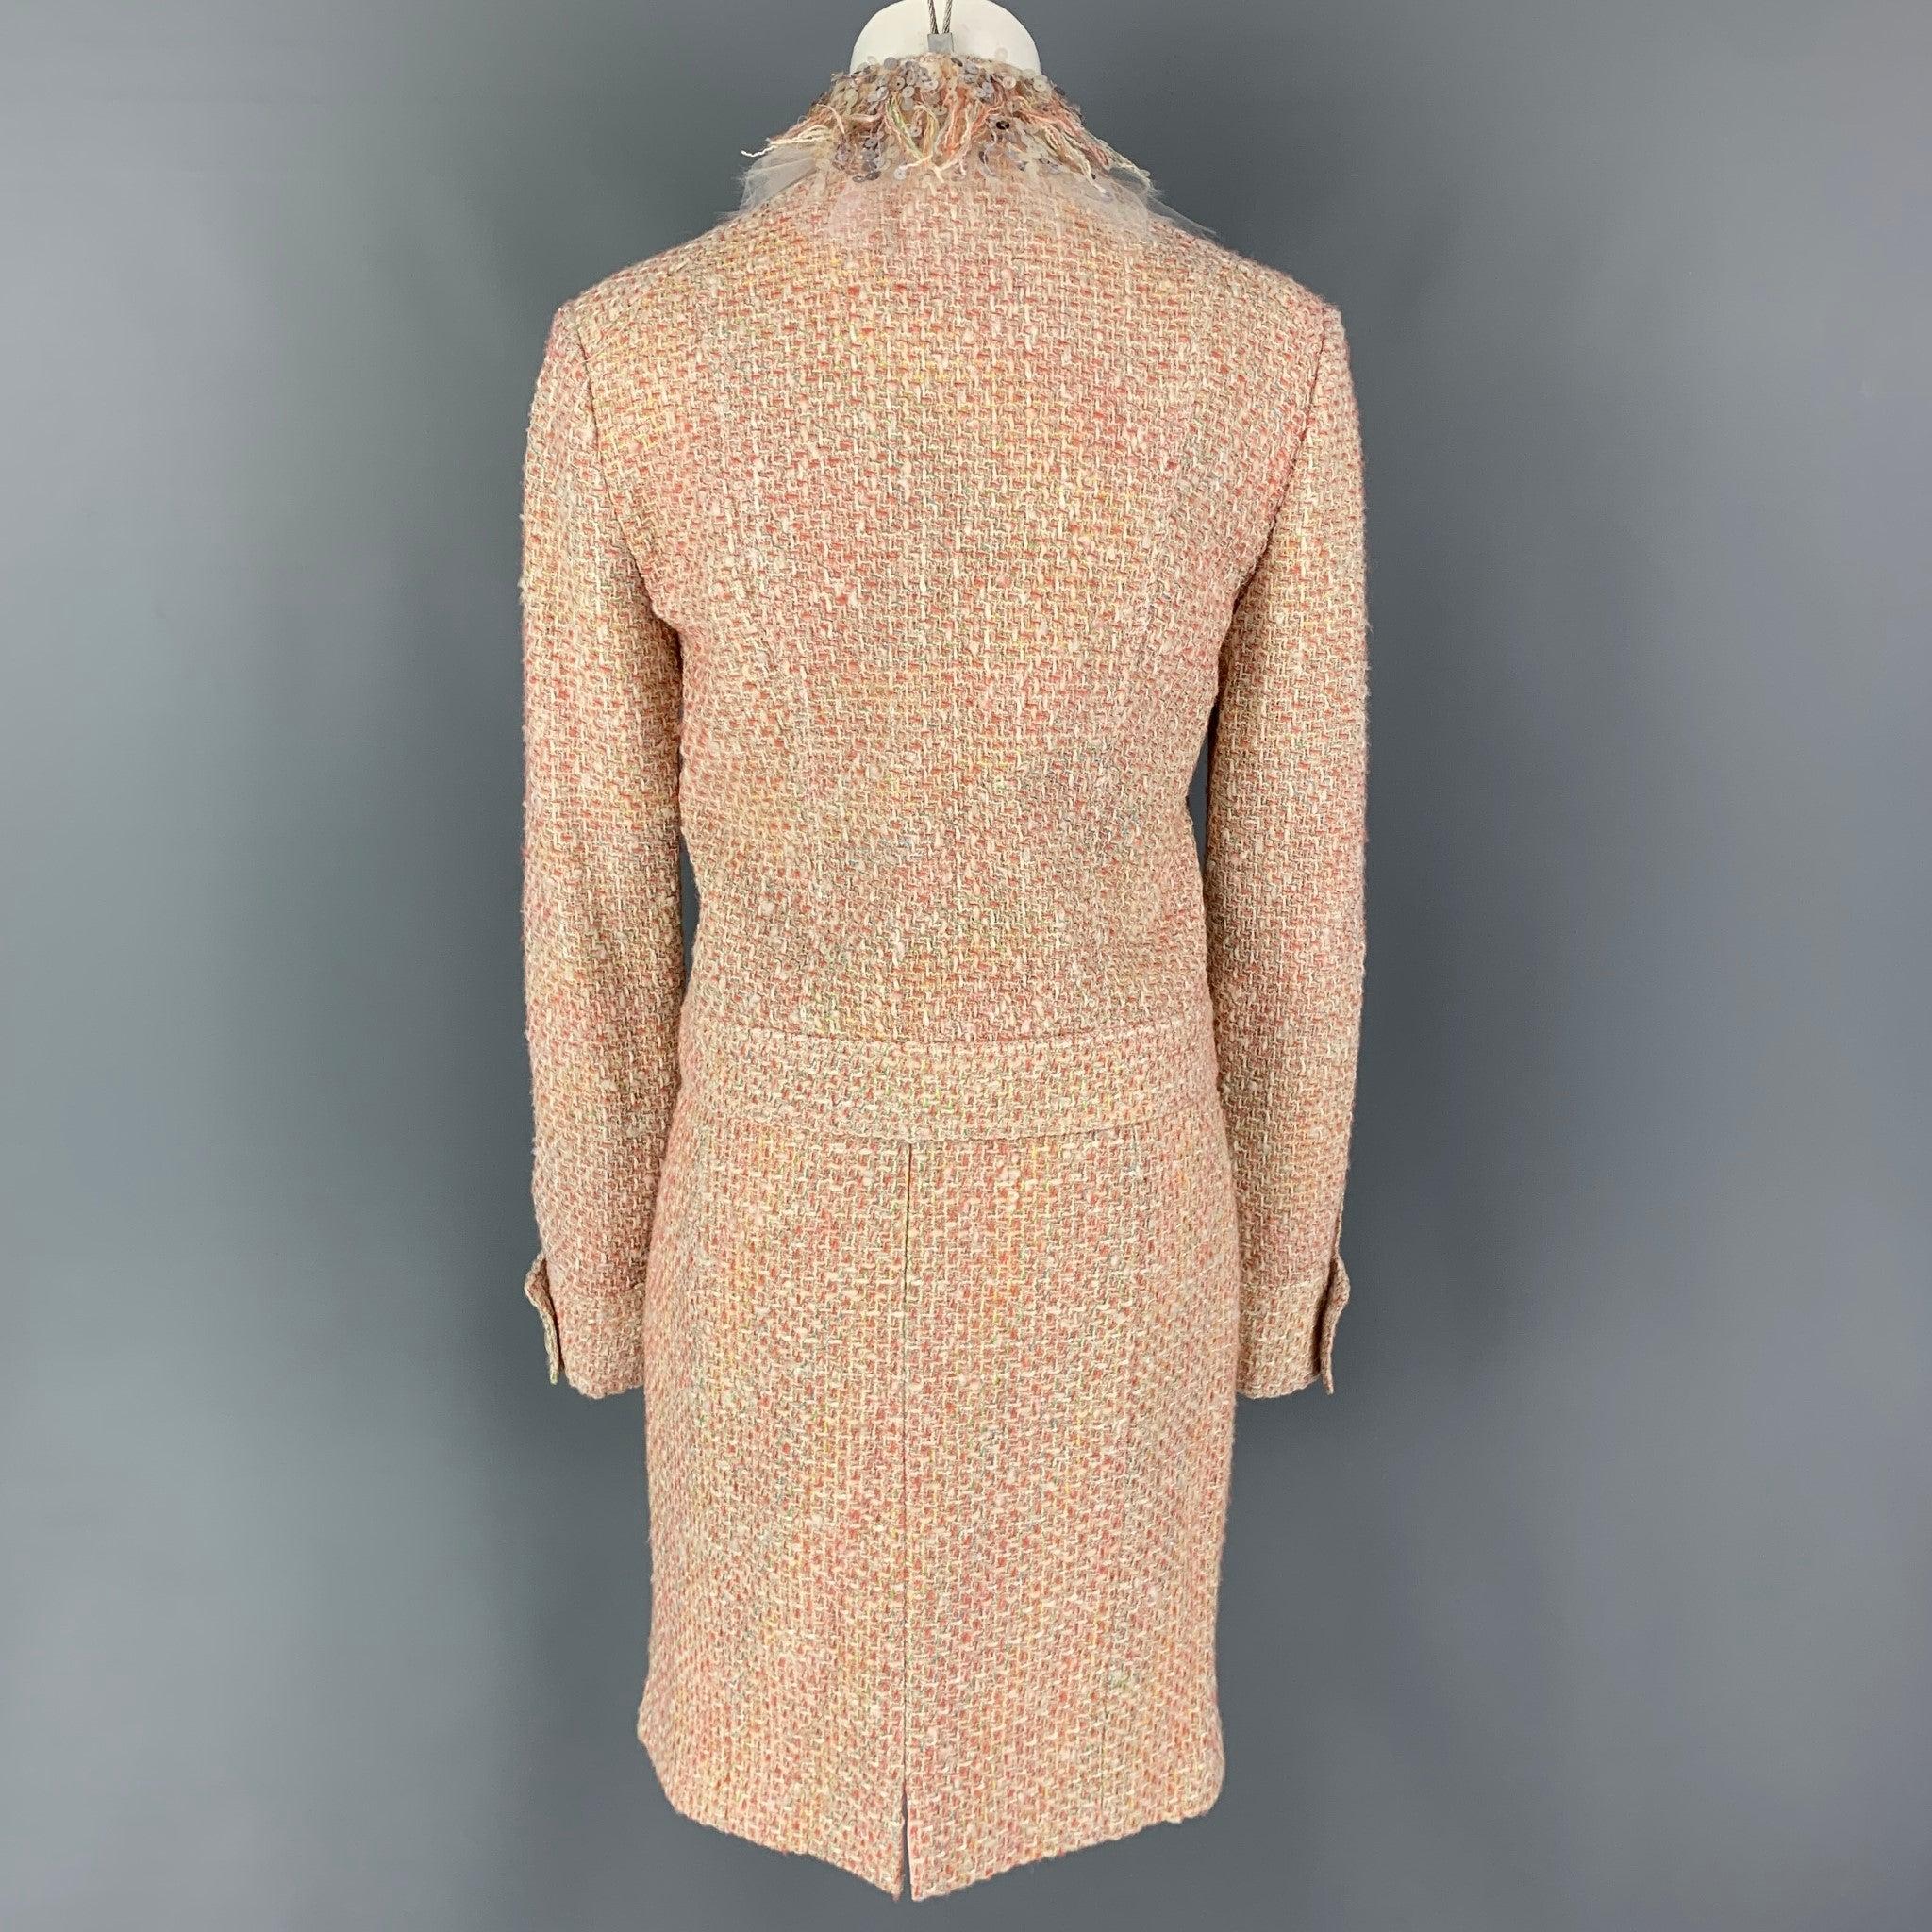 MONIQUE LHUILLIER Size 6 Beige Salmon Viscose Blend Tweed Zip Up Skirt Set In Good Condition For Sale In San Francisco, CA